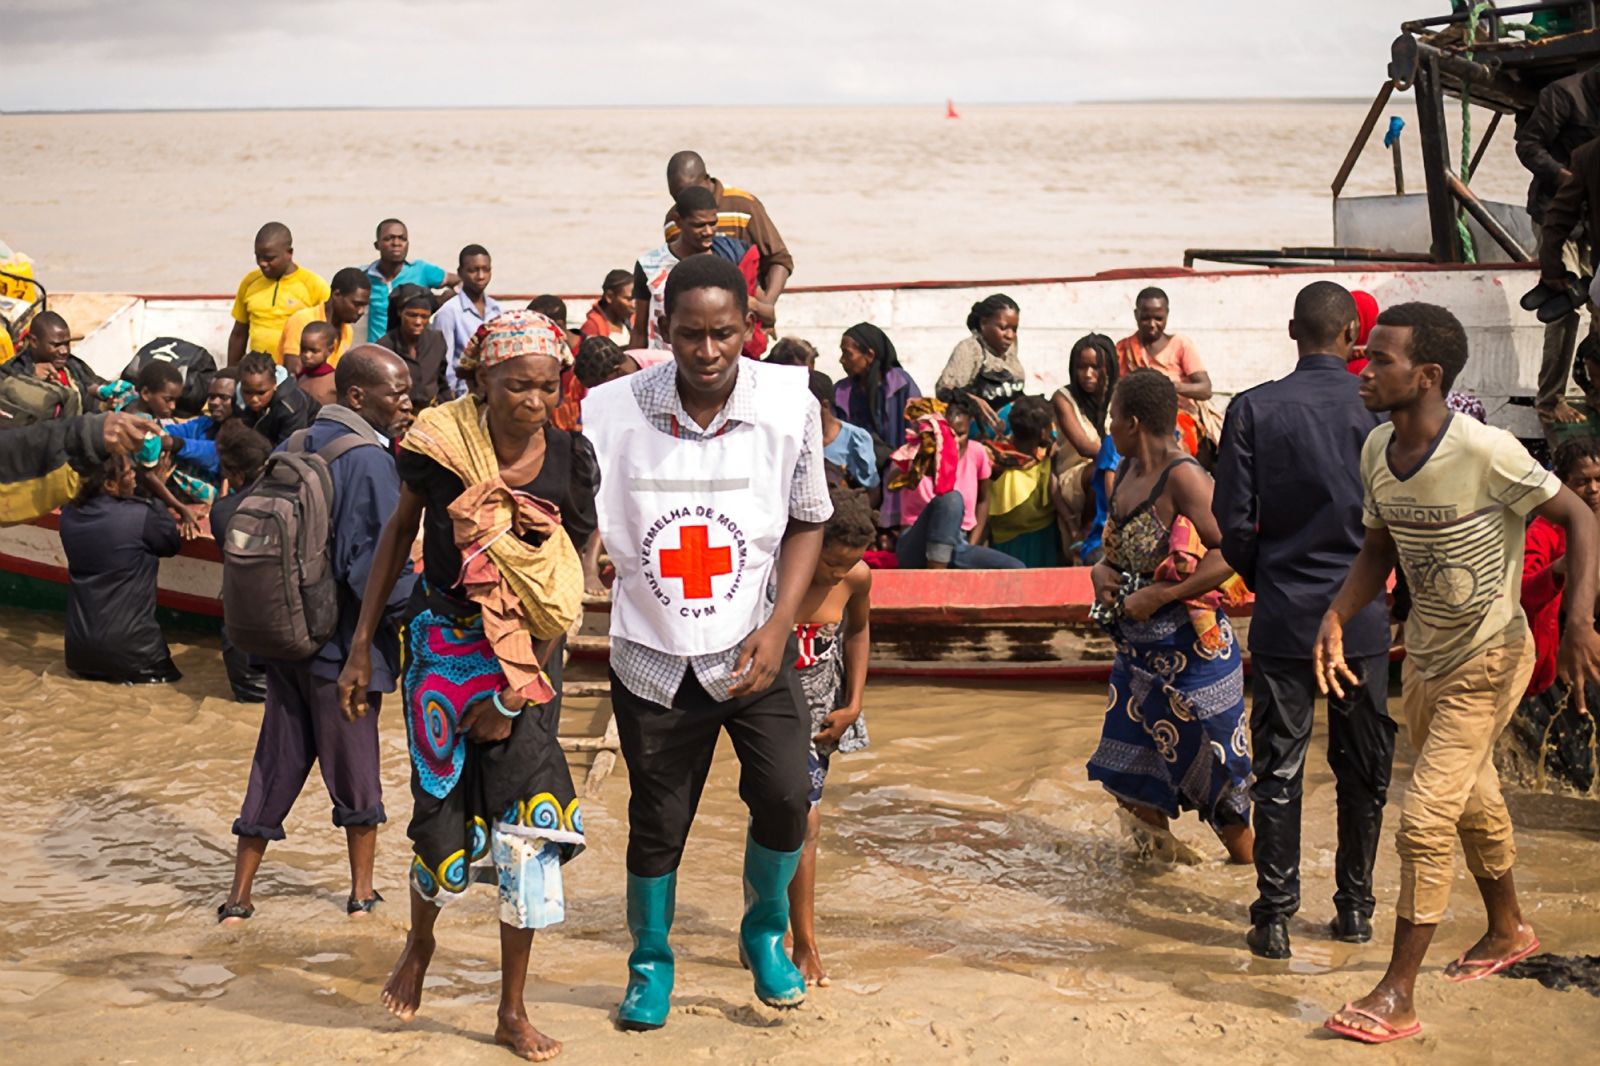 Cyclone Idai survivors rescued in boats to Beira, Mozambique, which had also been largely devastated.